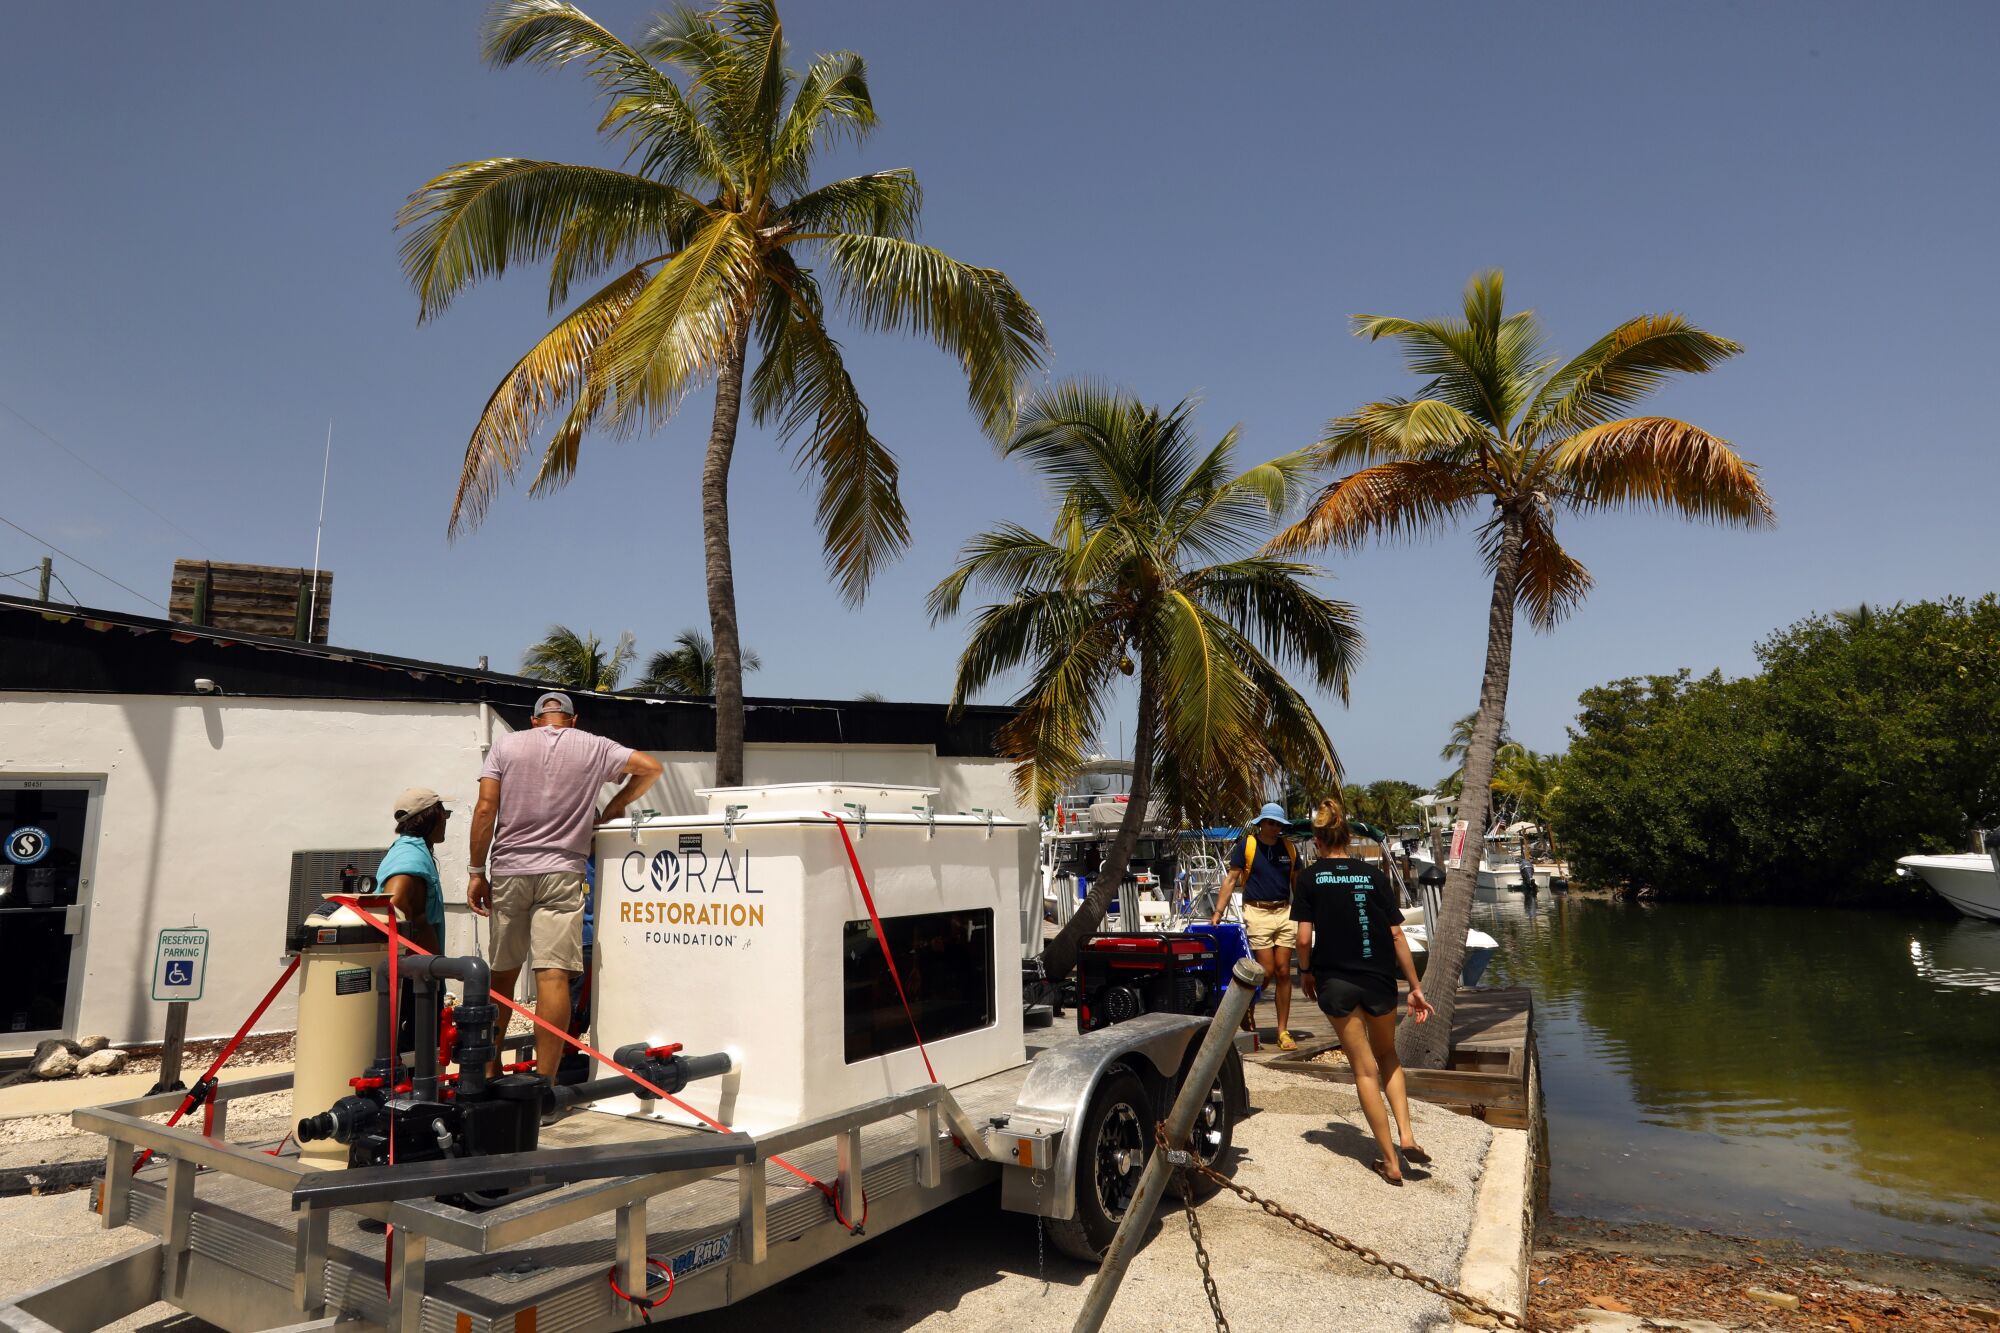 Members of the Coral Restoration Foundation load coral taken from the ocean nursery into the 